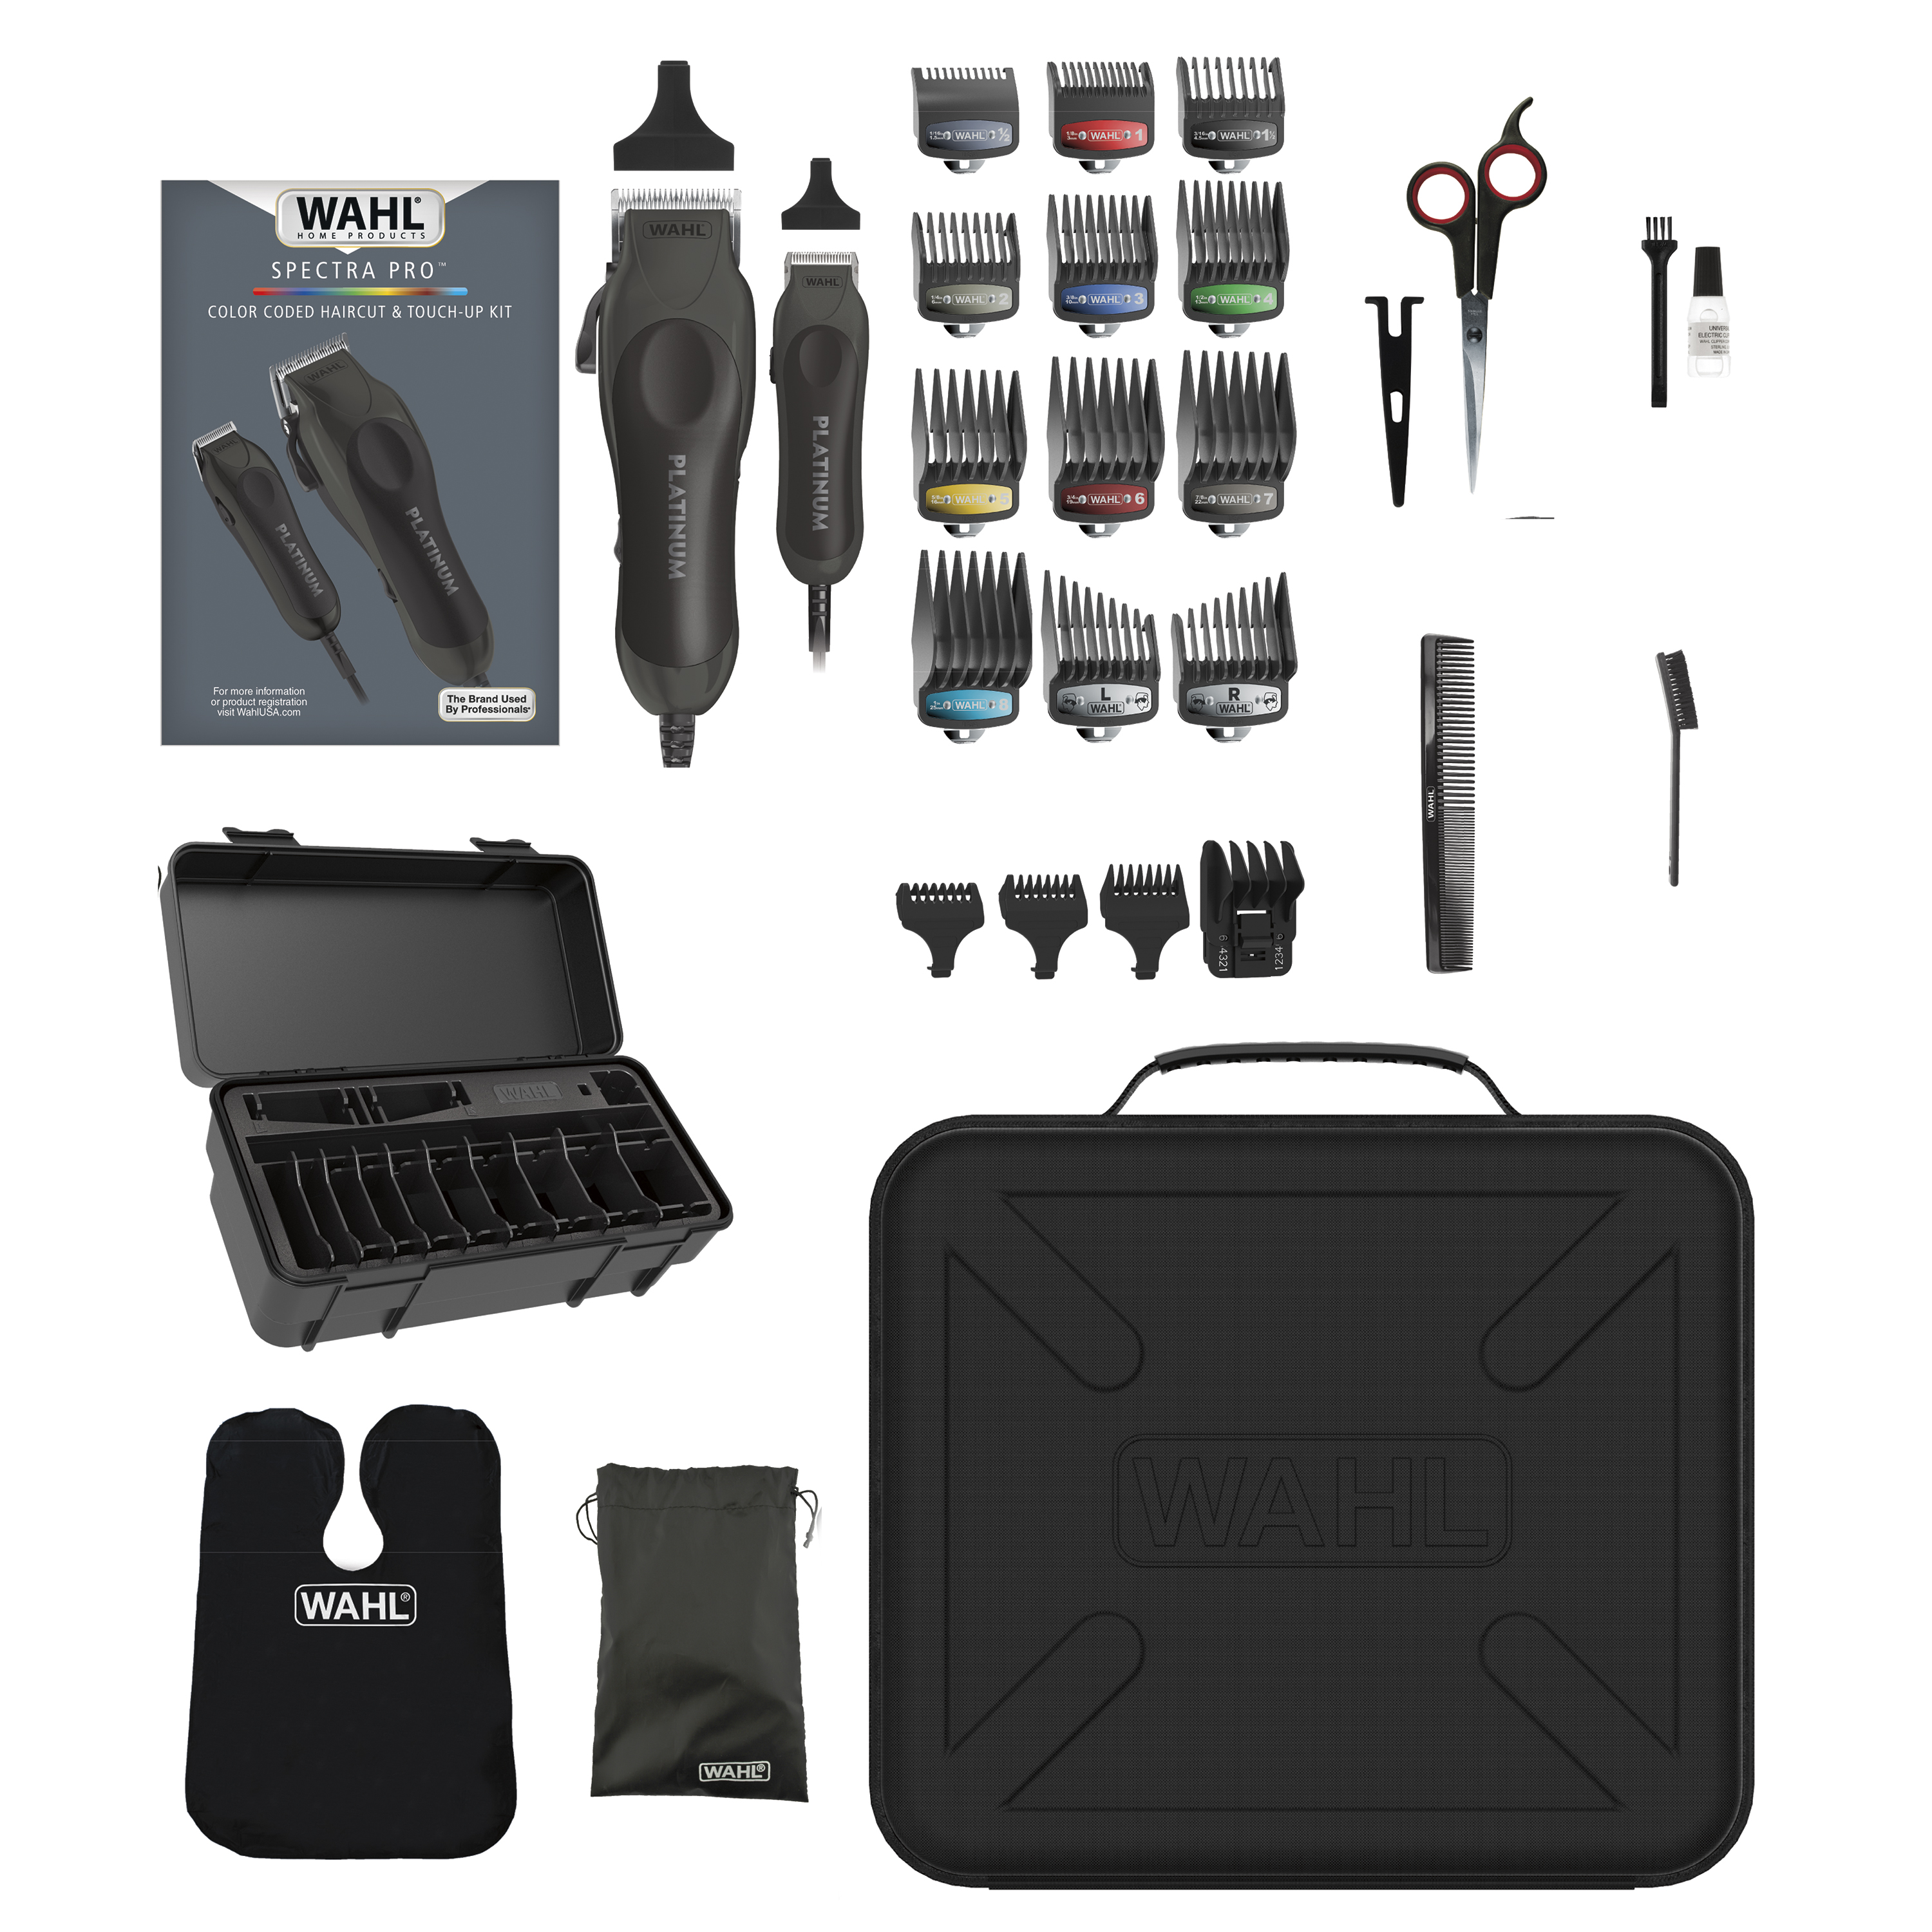 WAHL, Clipper Pro Series Platinum Haircutting Combo Kit with Barbers Shears Model 79804100, Black - 2